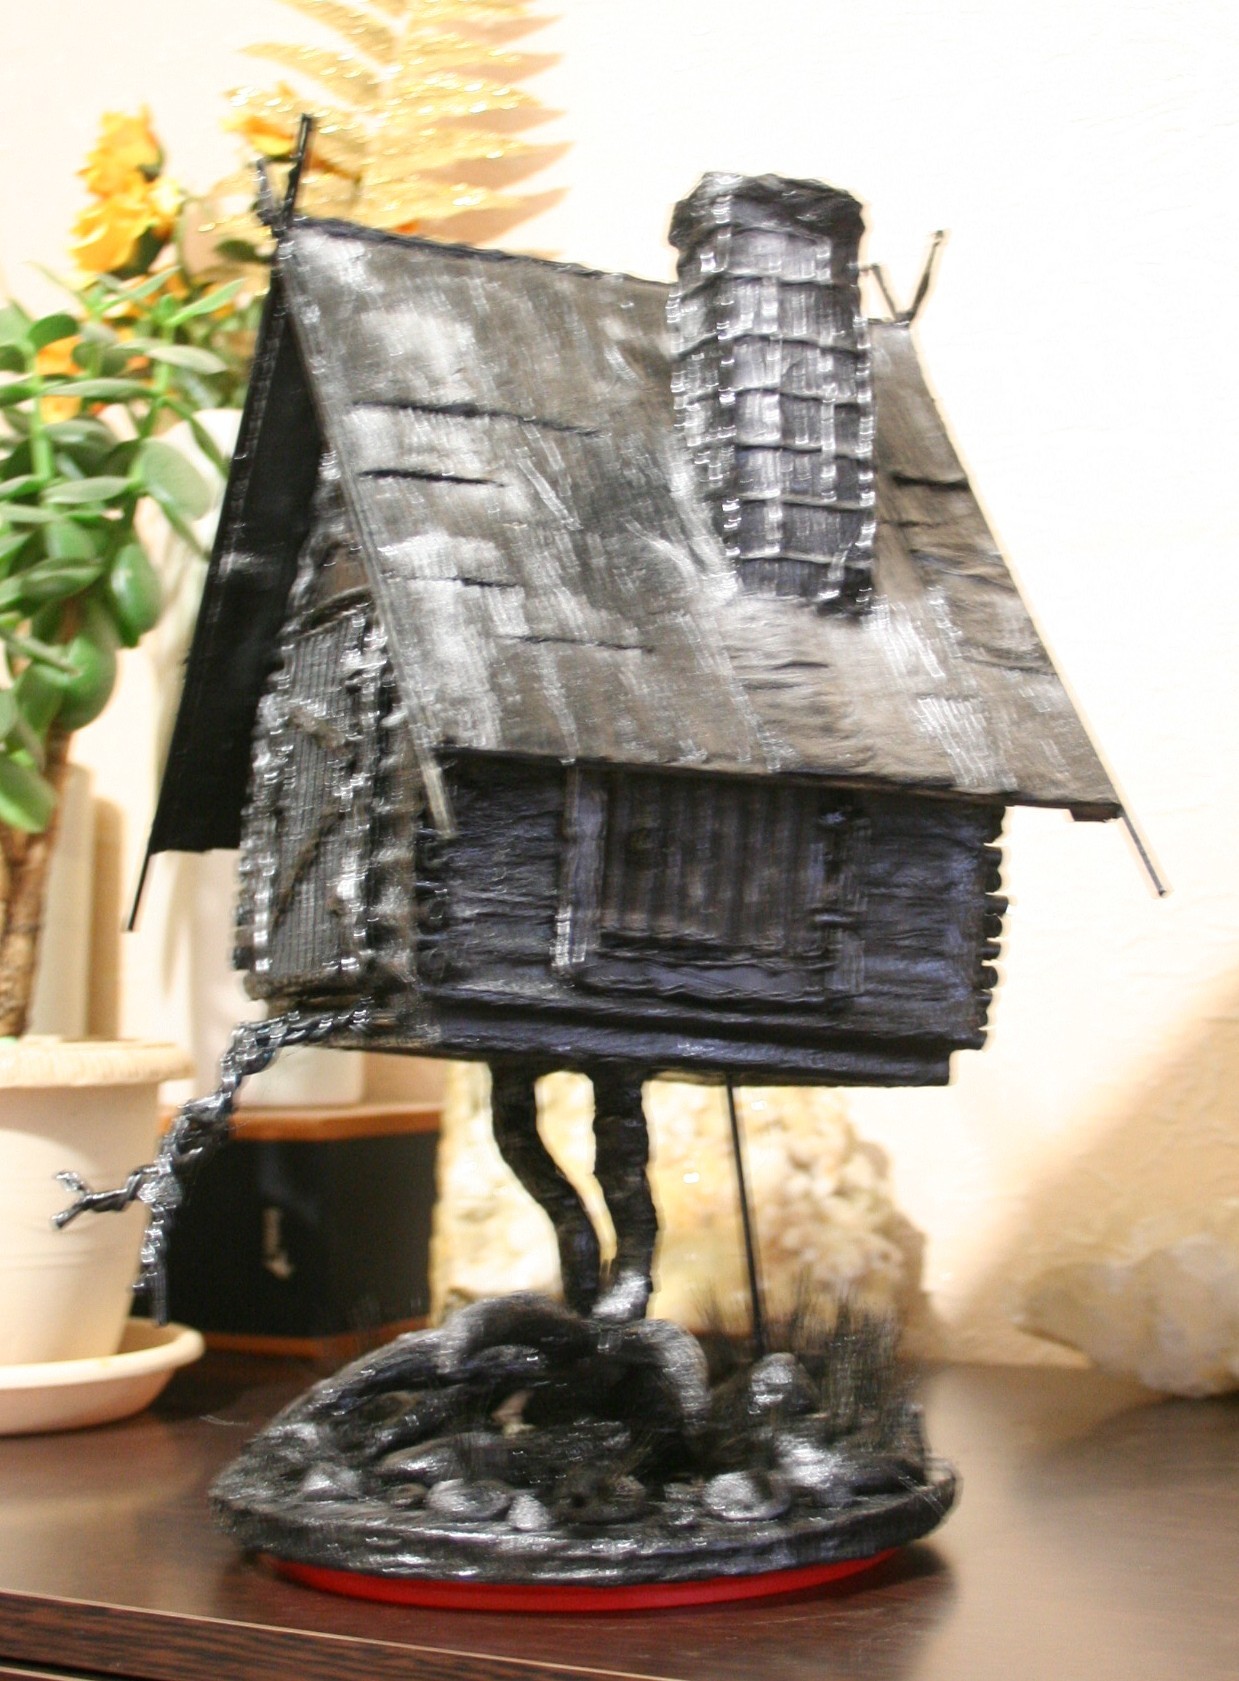 Russian fairy tales rule - a hut on chicken legs! - My, Needlework without process, Paper, Needlework, Paper modeling, Modeling, My, Russian tales, Fantasy, Longpost, Papercraft